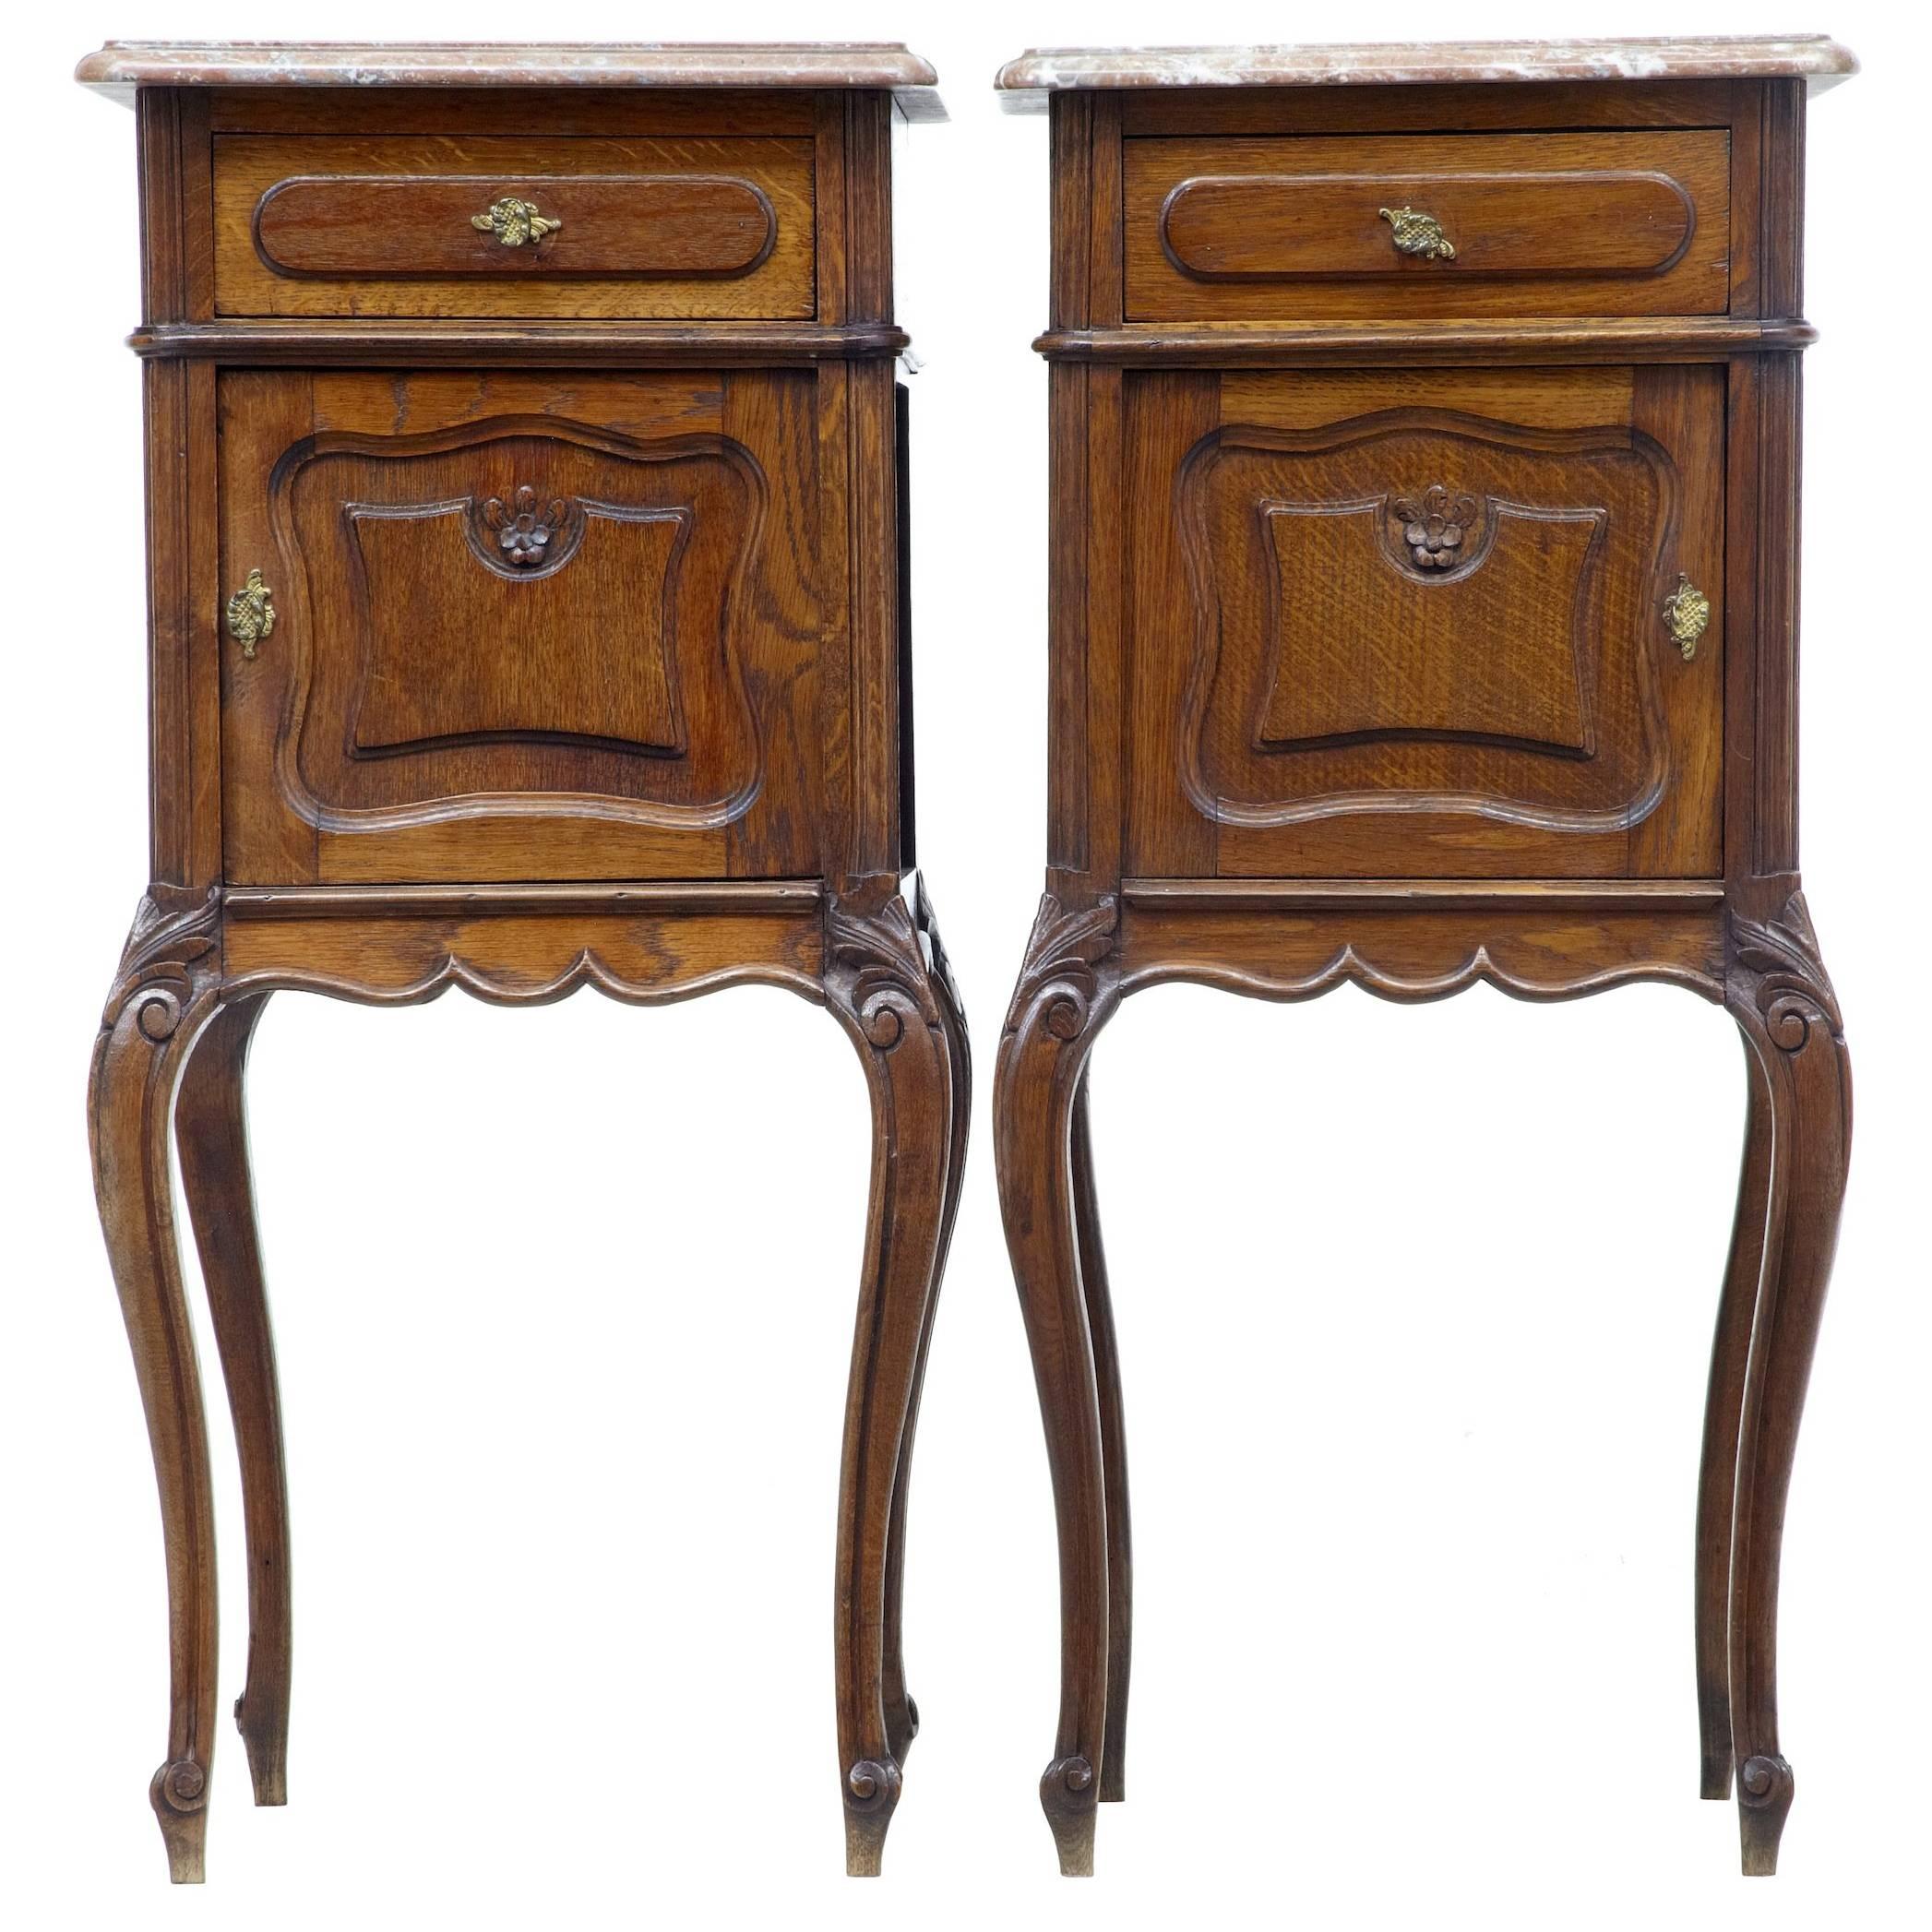 Pair of 19th Century French Oak Marble-Top Nightstands